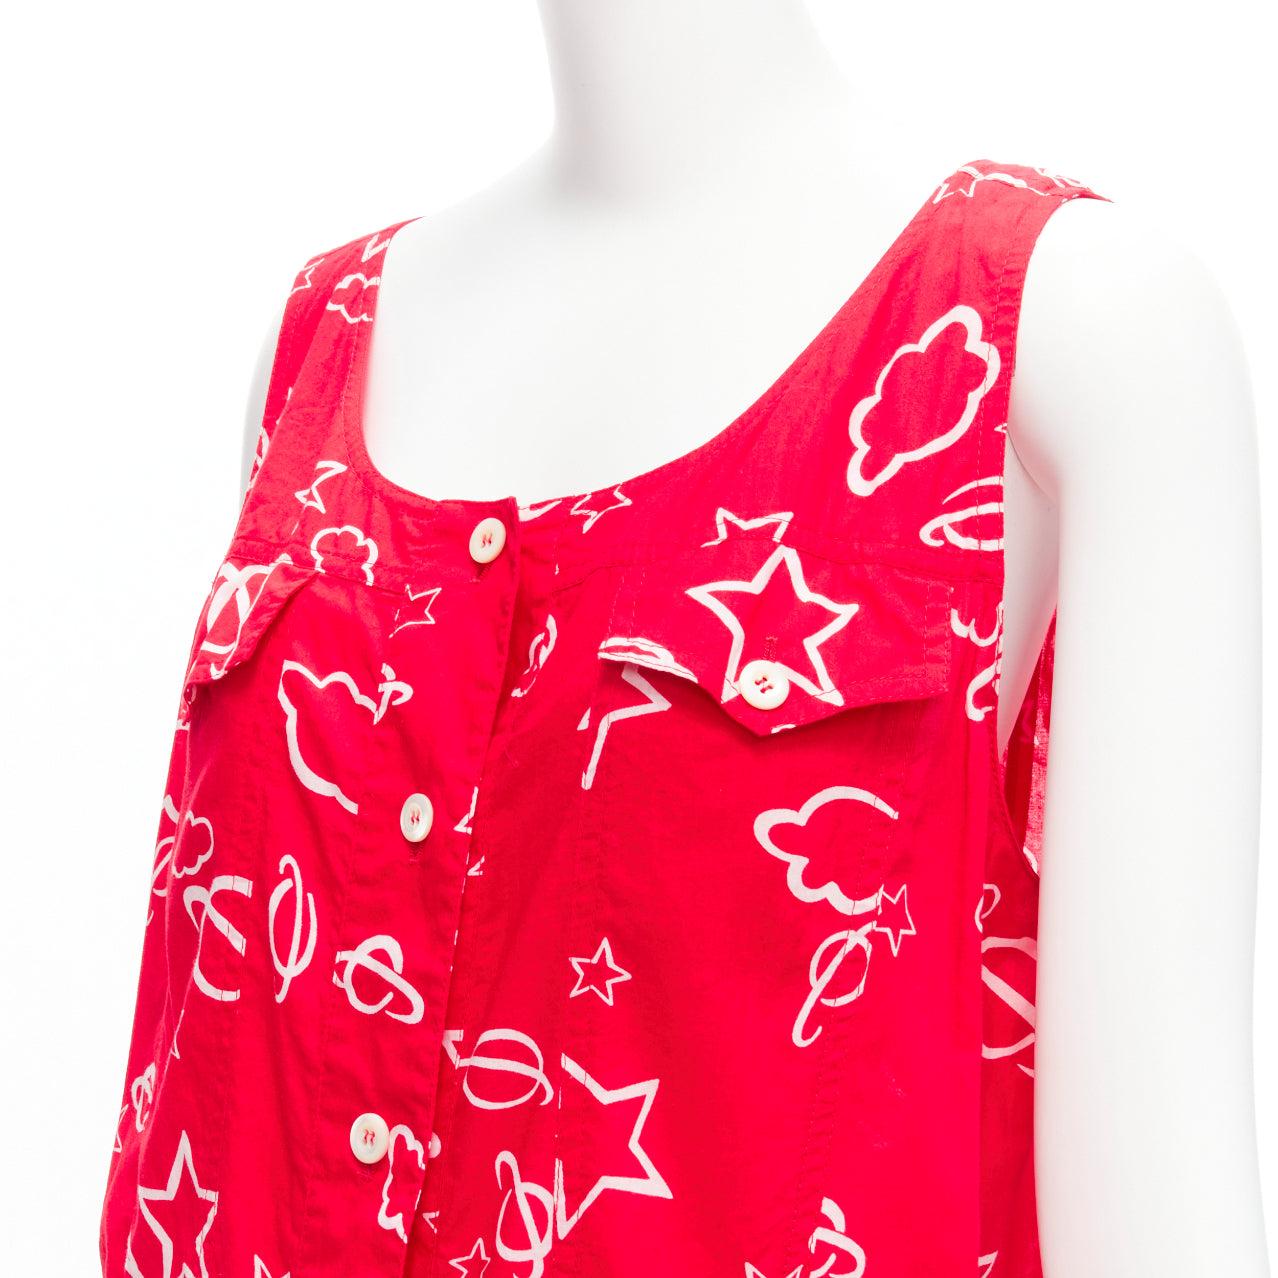 rare MIU MIU 2013 red white stars planets print cotton red pocketed romper playsuit IT36 S
Reference: TGAS/D00549
Brand: Miu Miu
Designer: Miuccia Prada
Collection: 2013
Material: Cotton
Color: Red, White
Pattern: Cartoon
Closure: Button
Extra